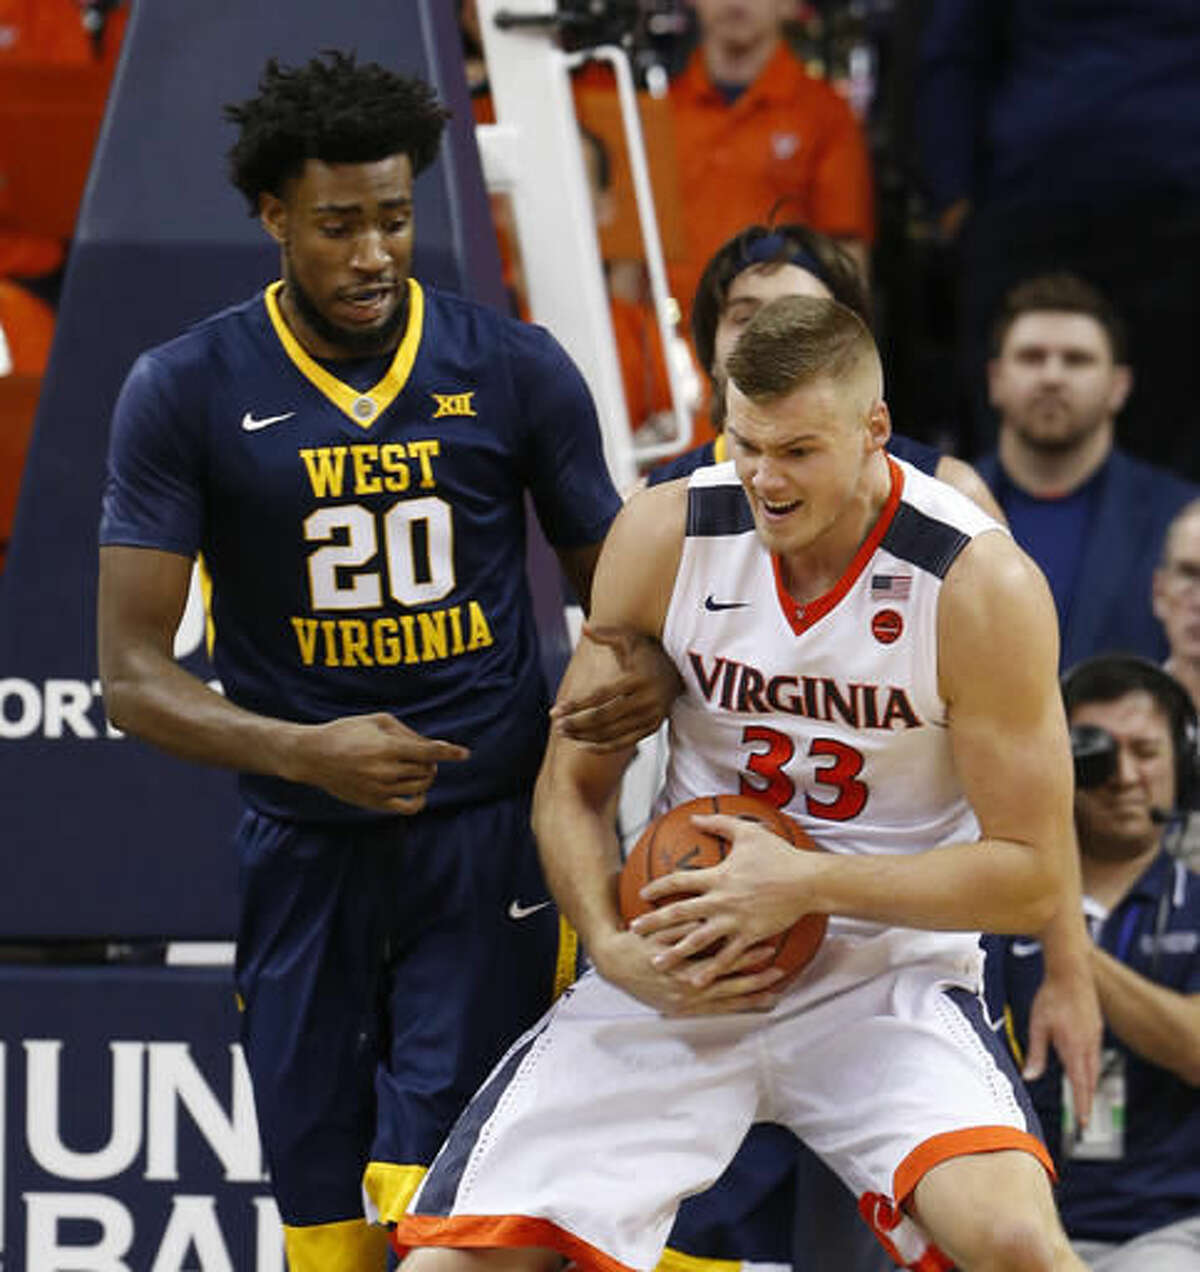 Virginia center Jack Salt (33) and West Virginia forward Brandon Watkins (20) fight for a rebound during the first half of an NCAA college basketball game in Charlottesville, Va., Saturday, Dec. 3, 2016. (AP Photo/Steve Helber)